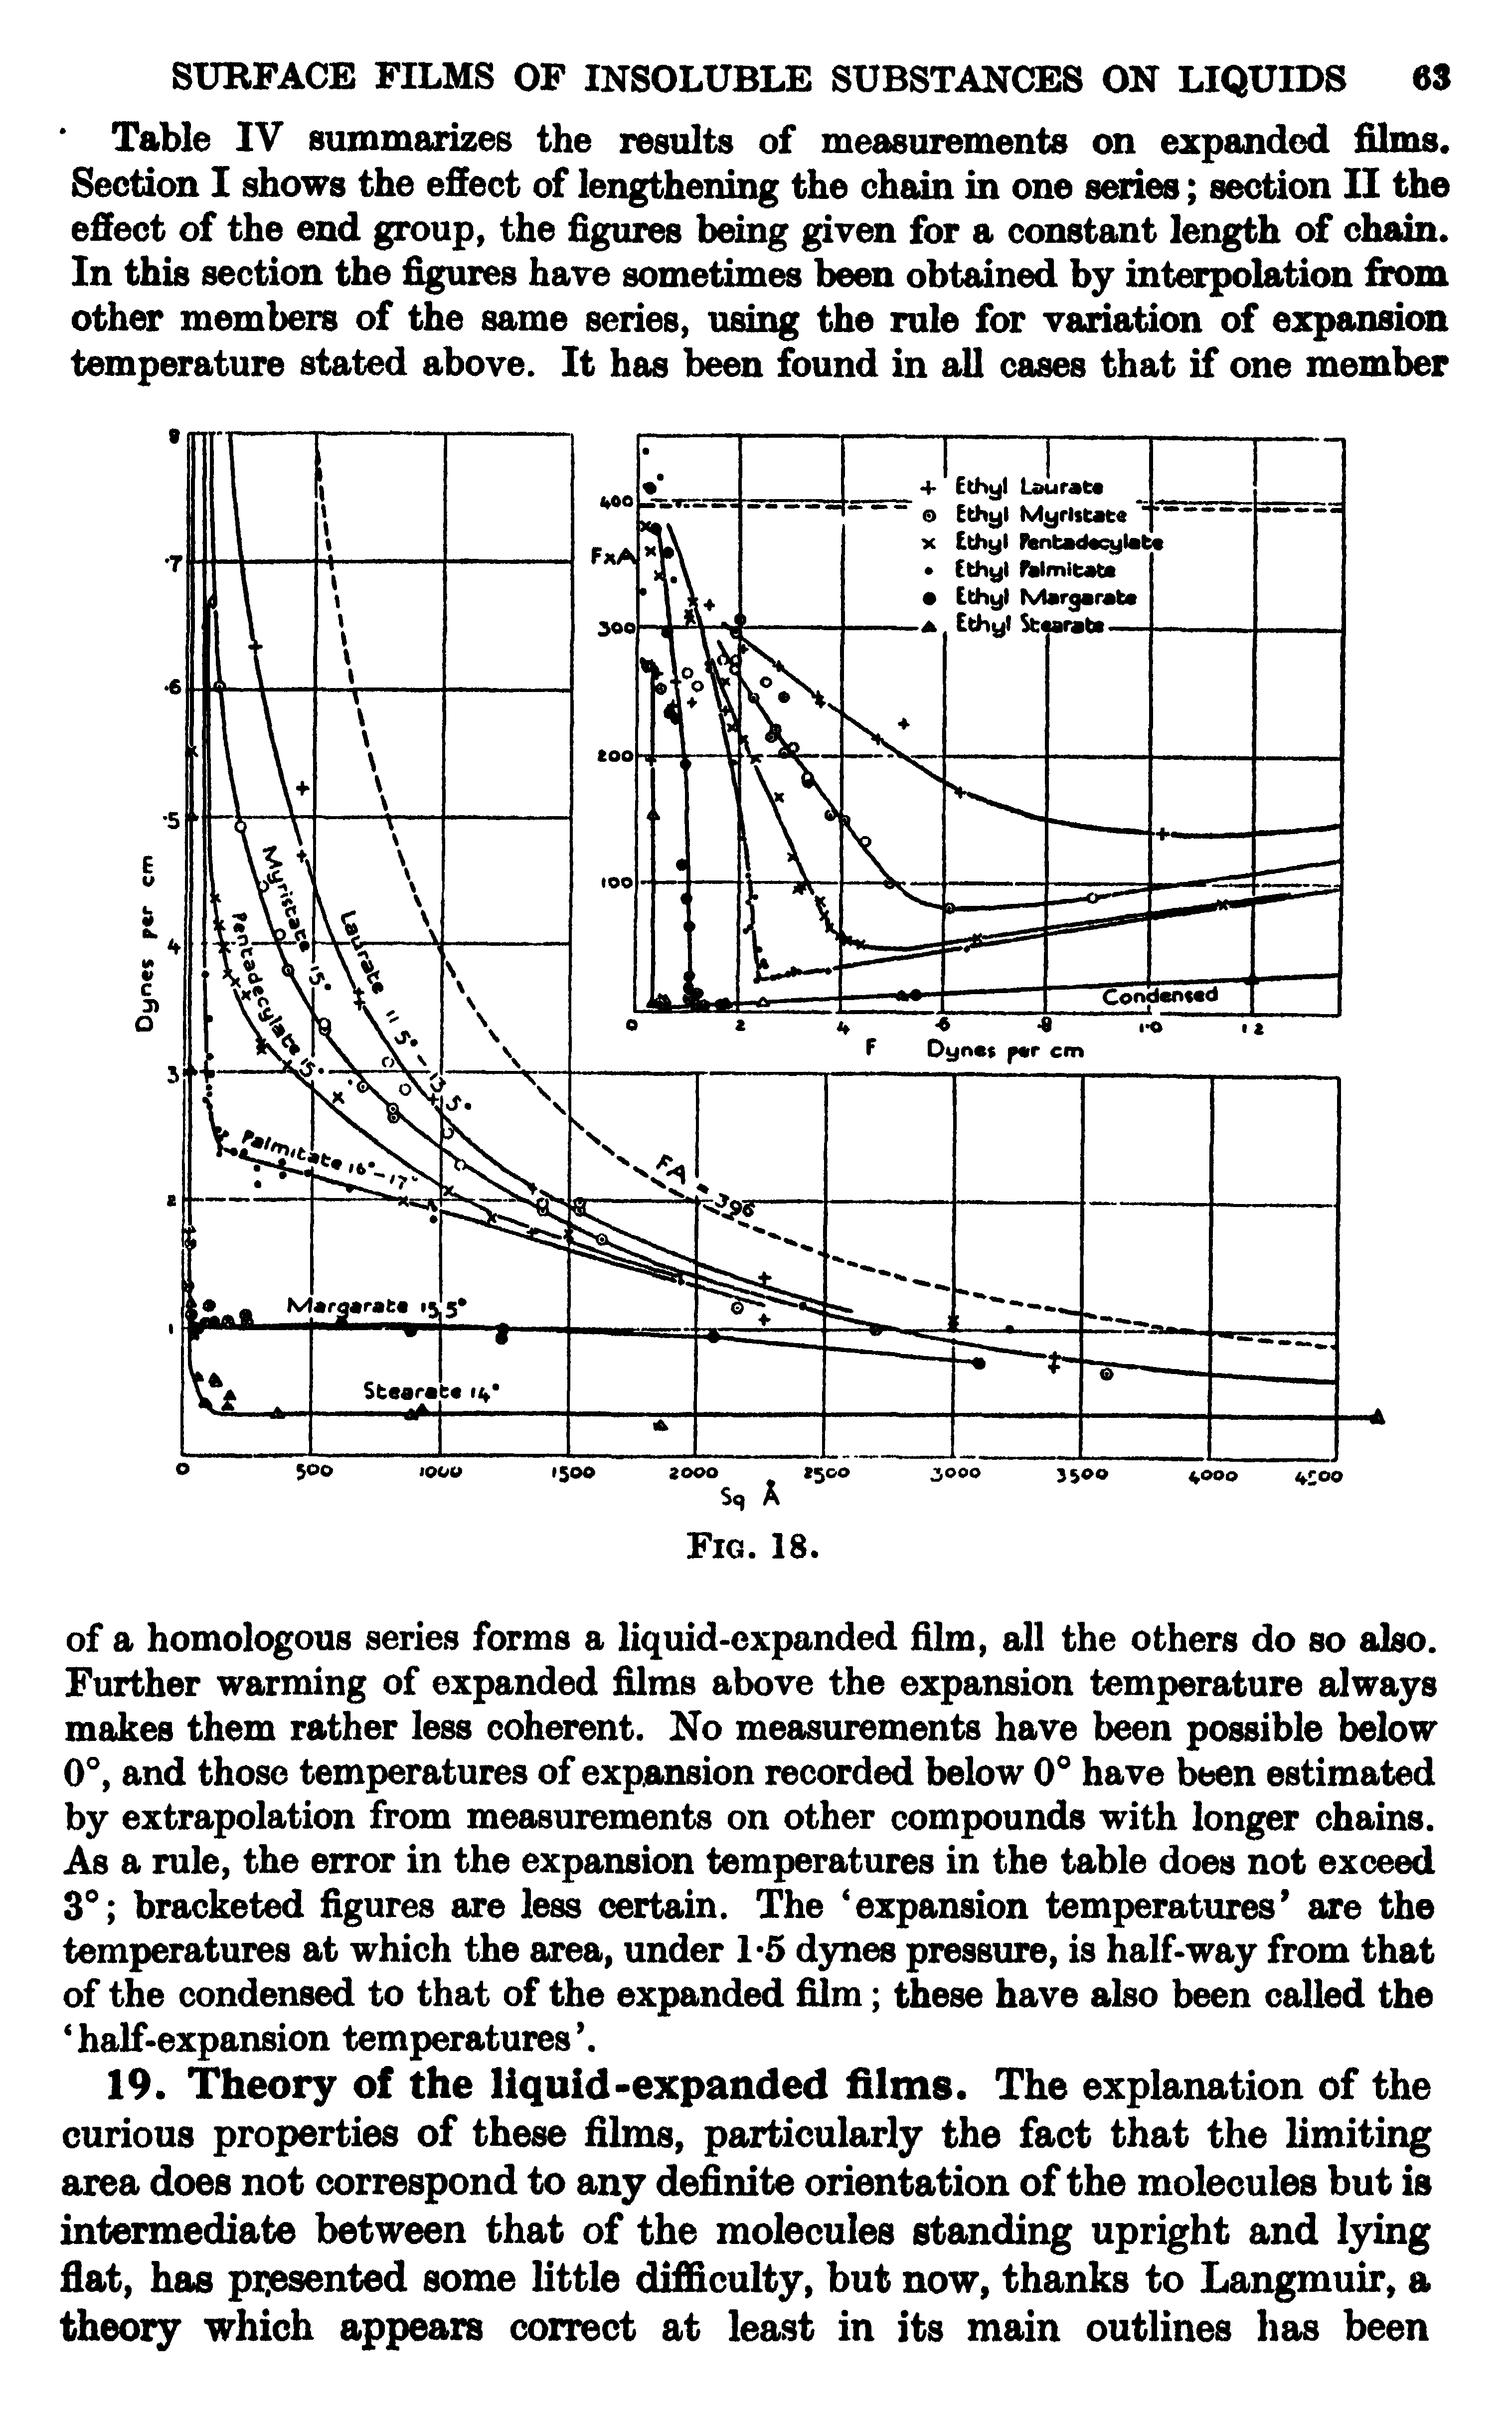 Table IV summarizes the results of measurements on expanded films. Section I shows the effect of lengthening the chain in one series section II the effect of the end group, the figures being given for a constant length of chain. In this section the figures have sometimes been obtained by interpolation from other members of the same series, using the rule for variation of expansion temperature stated above. It has been found in all cases that if one member...